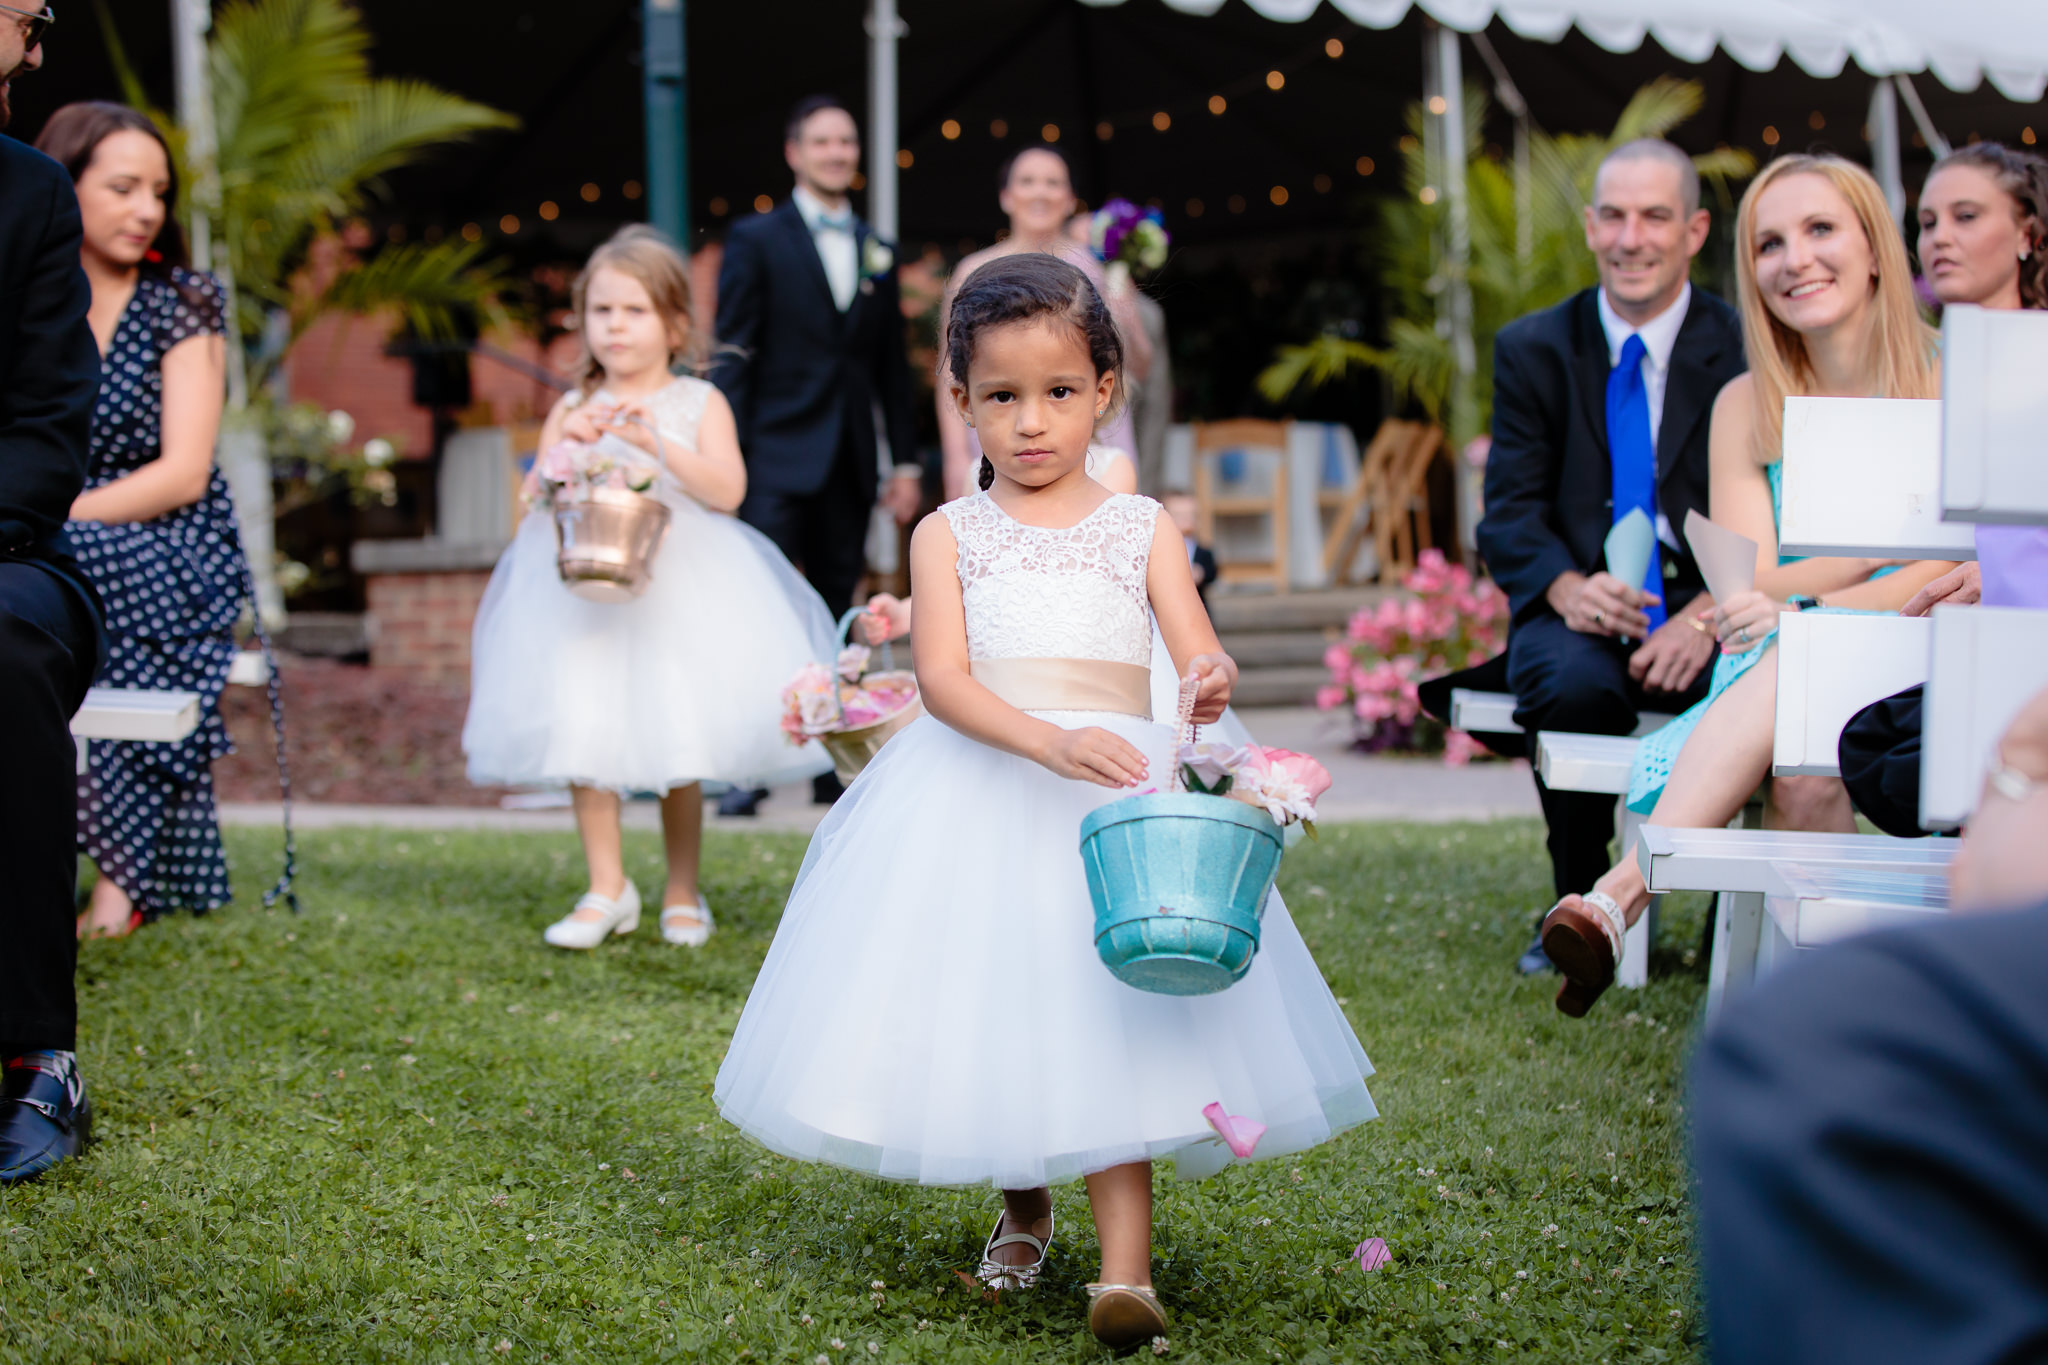 Flower girl walks down the aisle at an outdoor National Aviary wedding